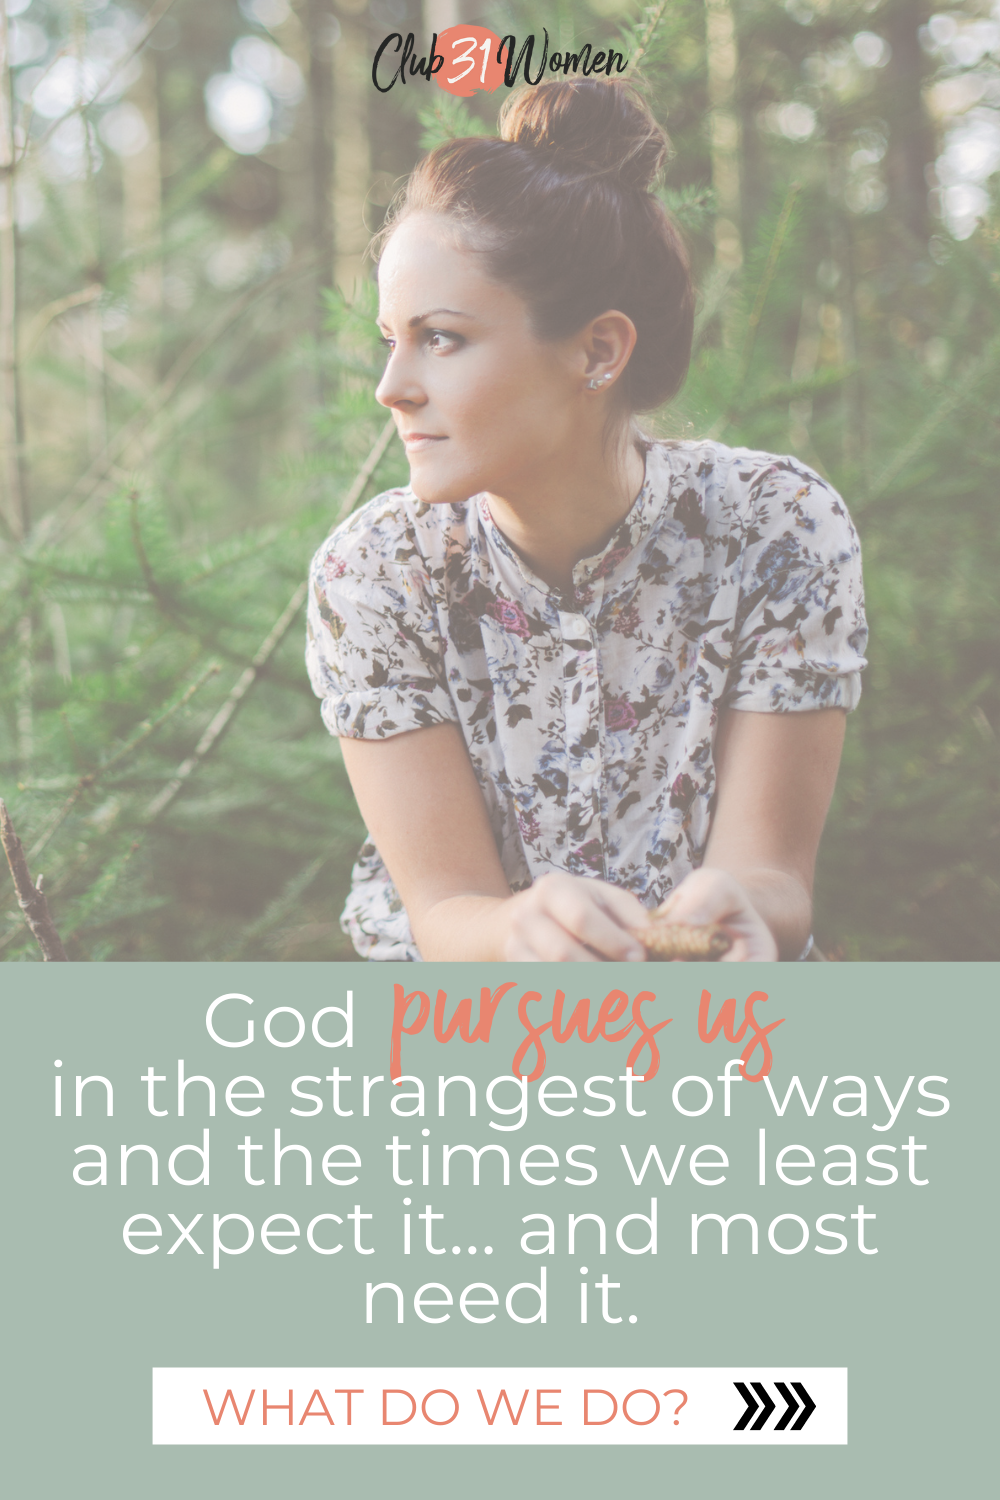 Sometimes we come up with our own rules of what God is like in our heads, but really, He is way kinder than we make Him out to be. via @Club31Women